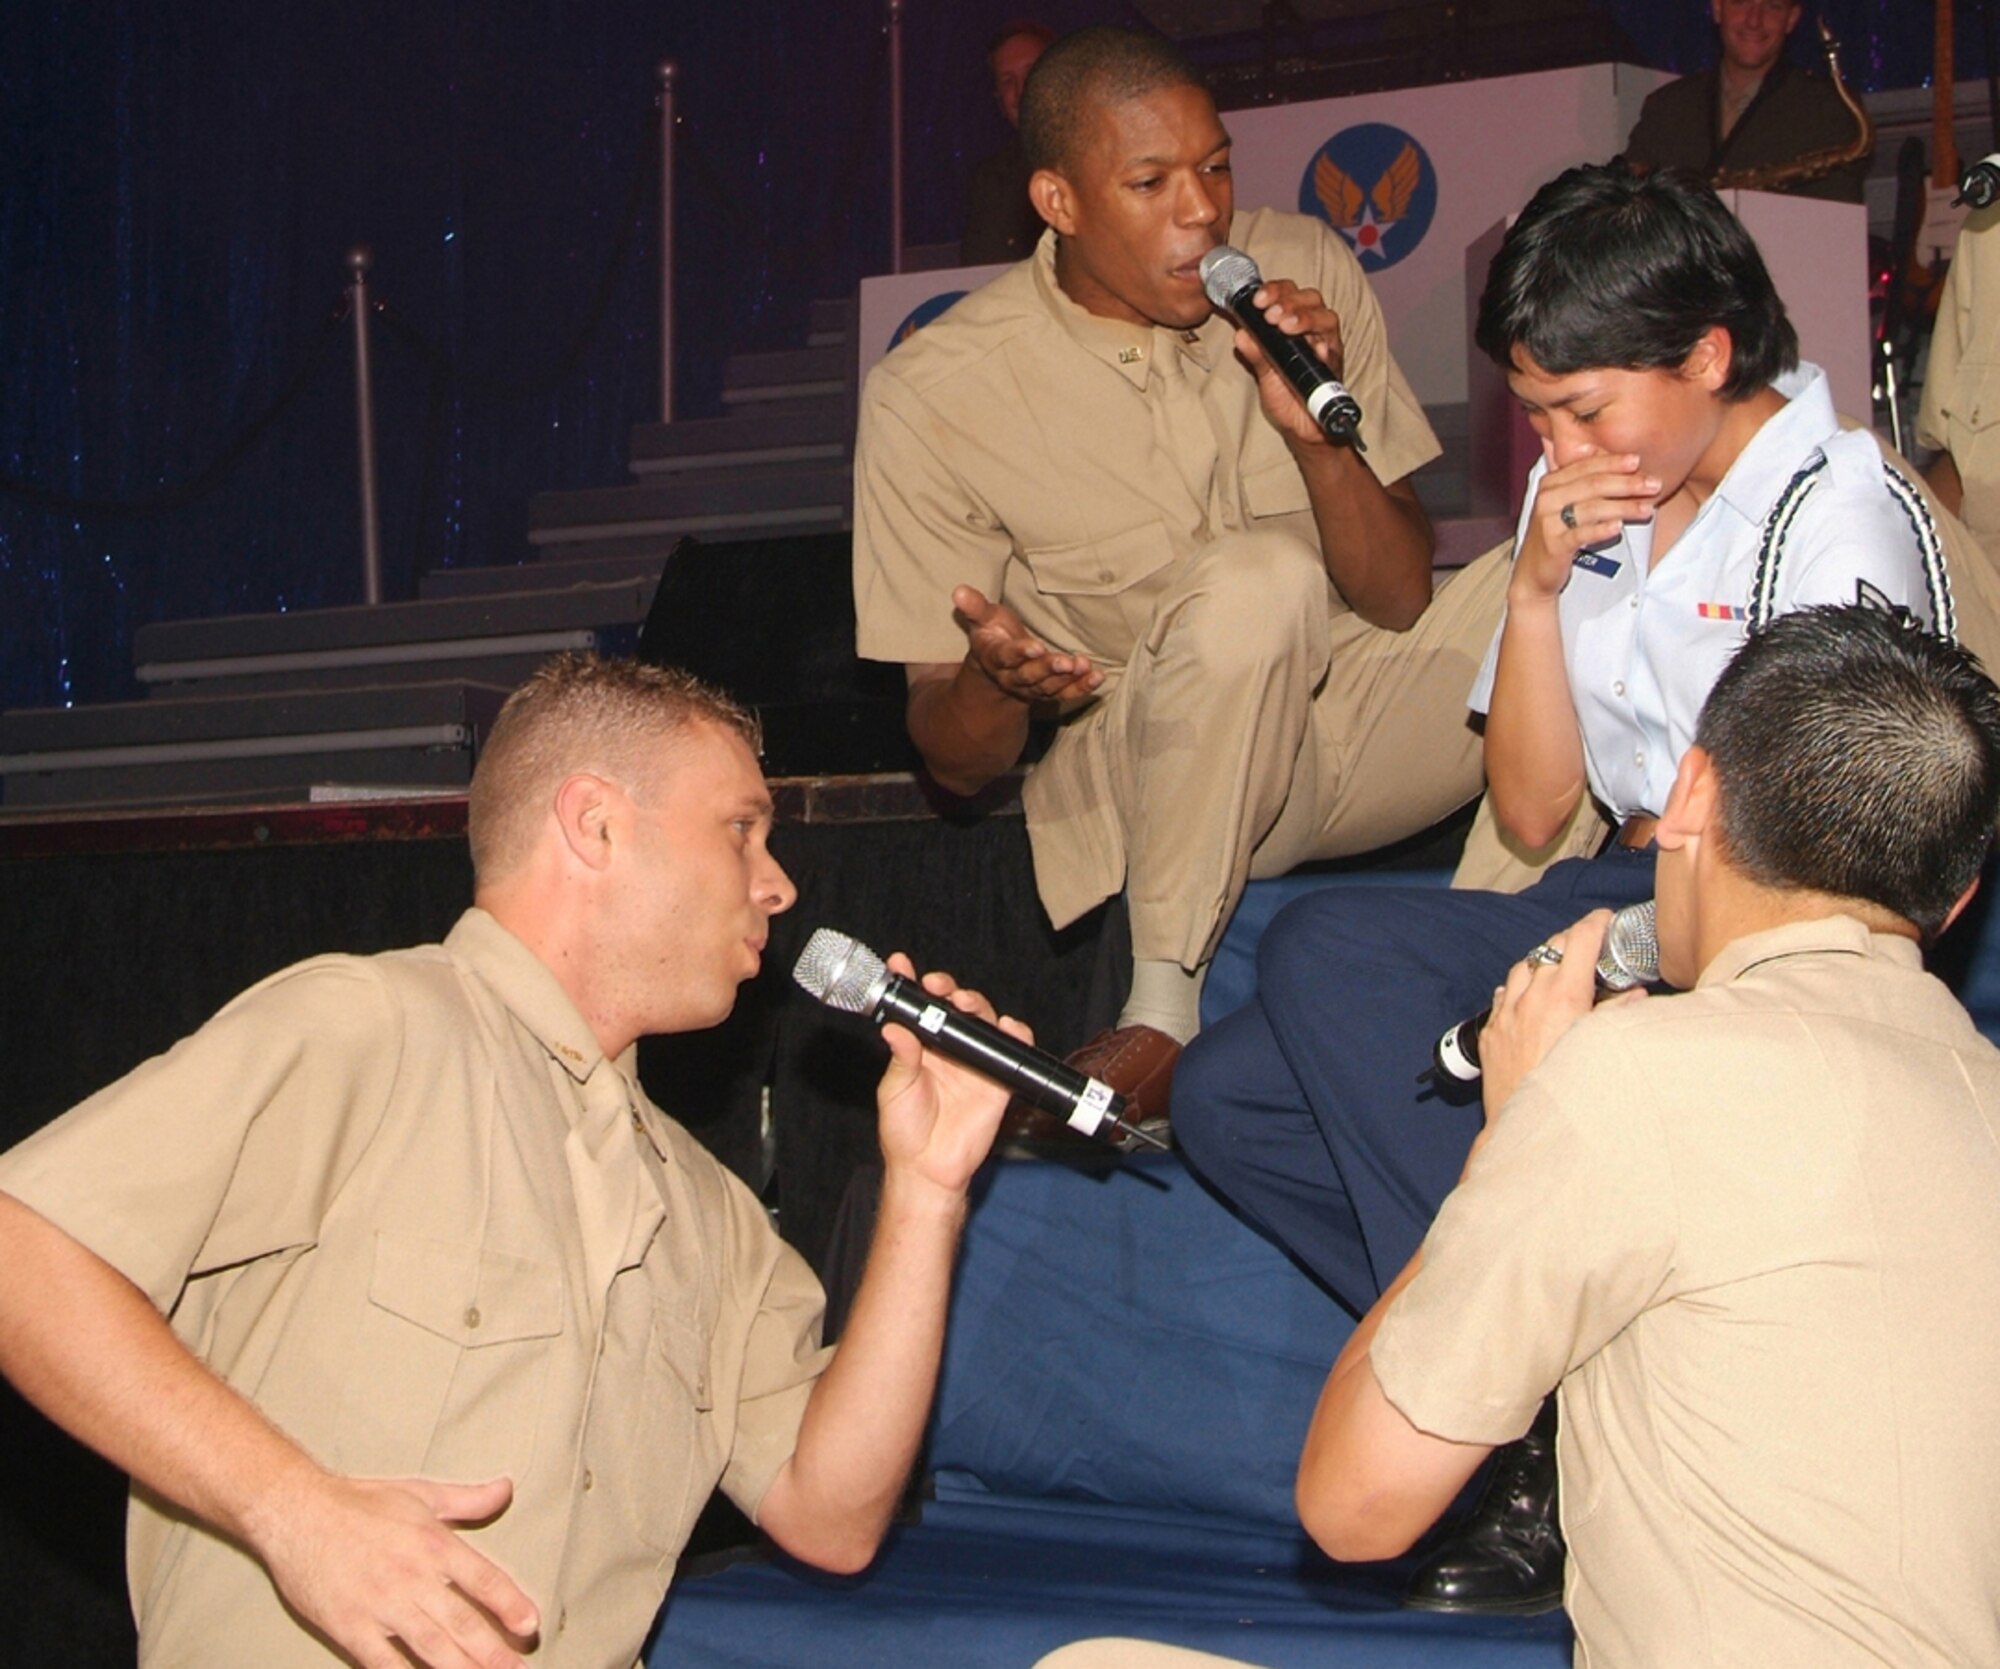 Airman Amari, left, Staff Sgt. Keith Loudermill and Senior Airman Rick Rosales serenade Airman 1st Class Stephanie Hunter on stage.  Airman Hunter is a student in the 336th Training Squadron.  Sergeant Loudermill is from Randolph AFB, Texas, and Airman Rosales is stationed at Osan Air Base, Republic of Korea.  (U.S. Air Force photo by Adam Bond)